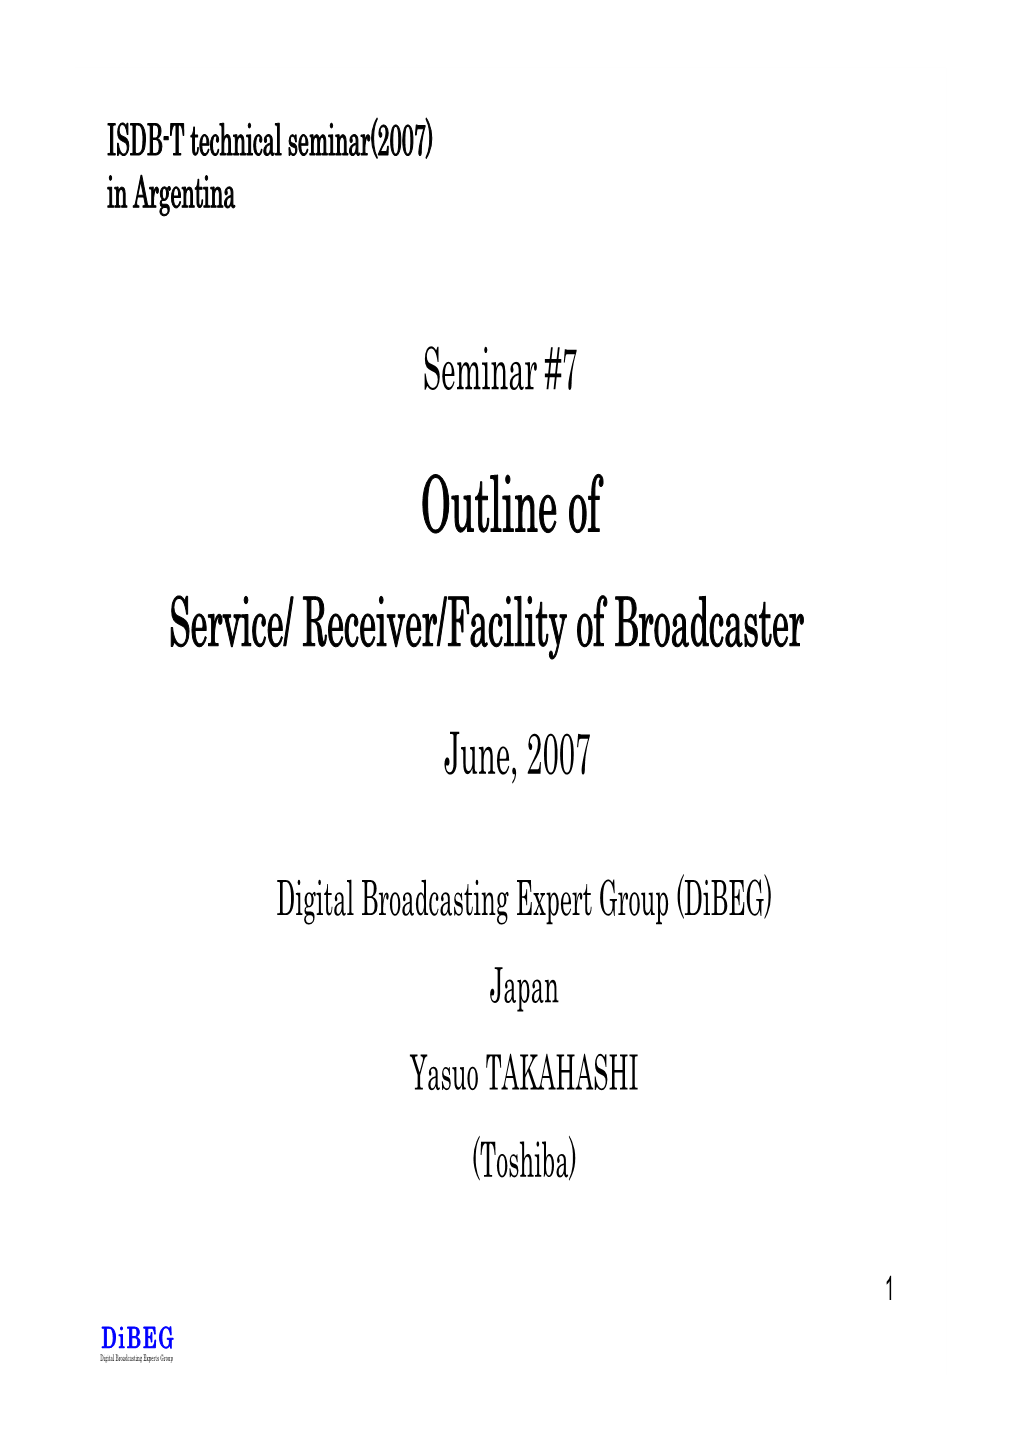 Outline of Service/ Receiver/Facility of Broadcaster